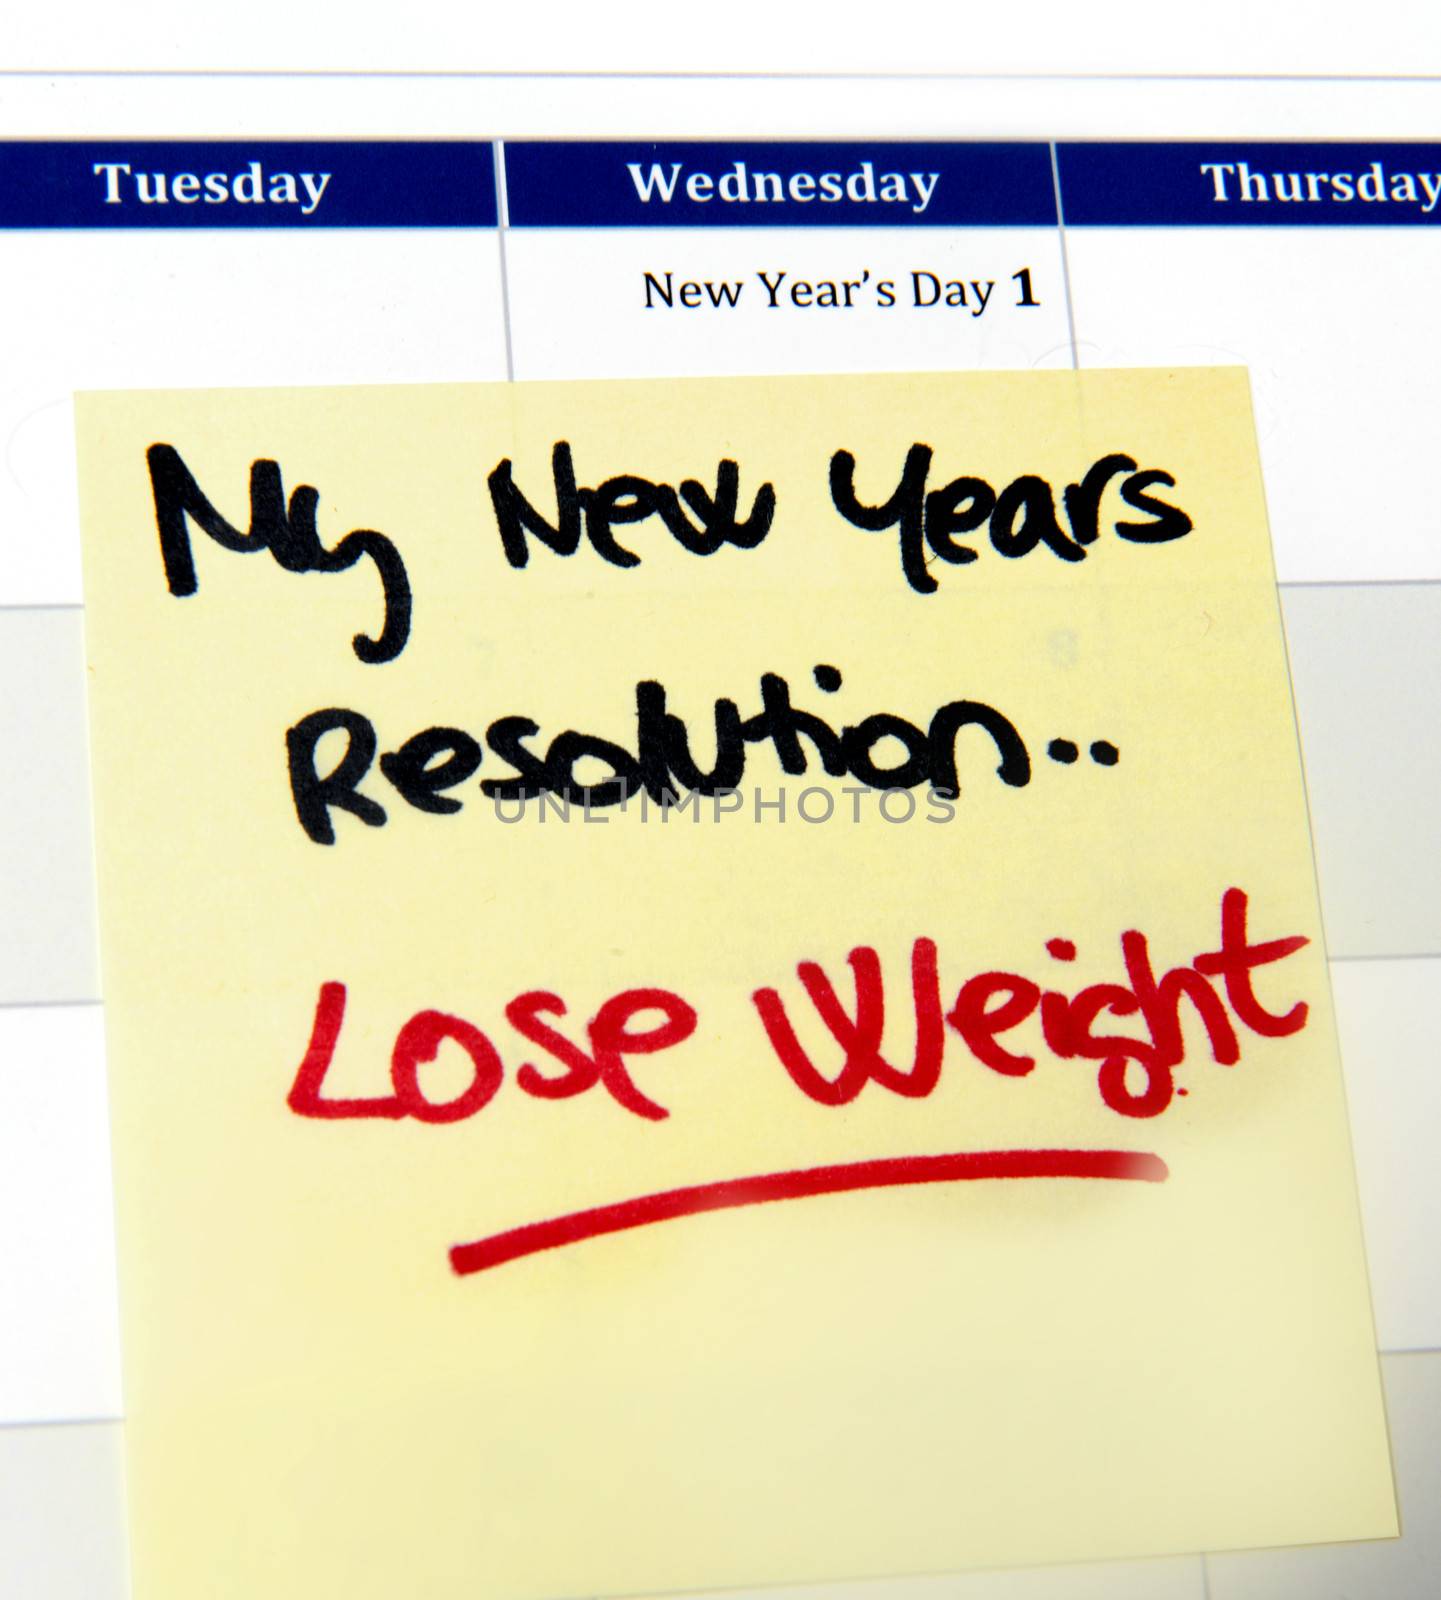 New Years Resolution Lose Weight by ocusfocus